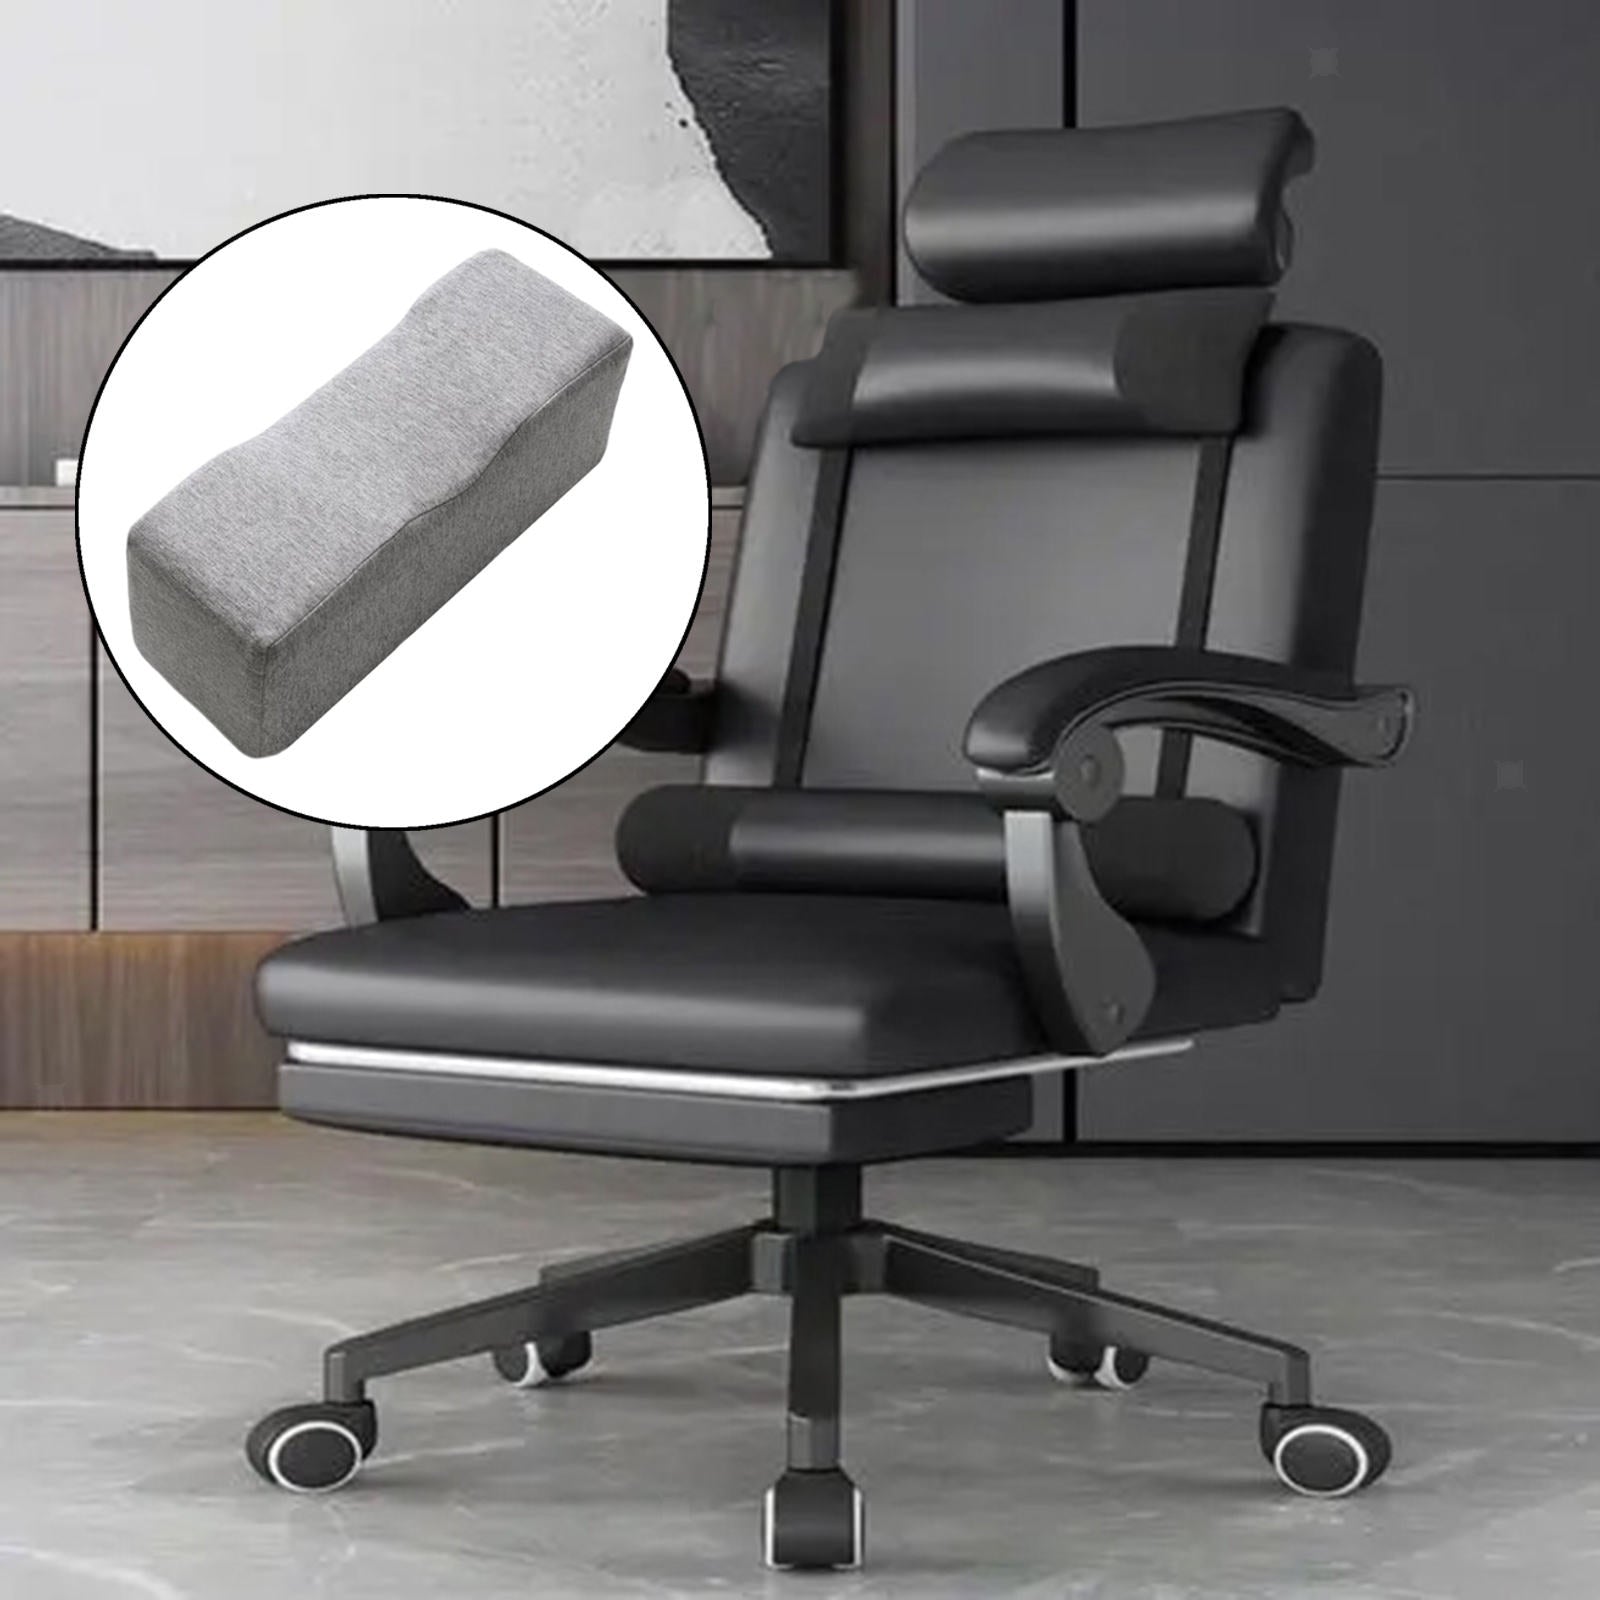 2 Pieces Soft Chair Armrest Pad Armrest Cover Cover Cushion for Lift Chair